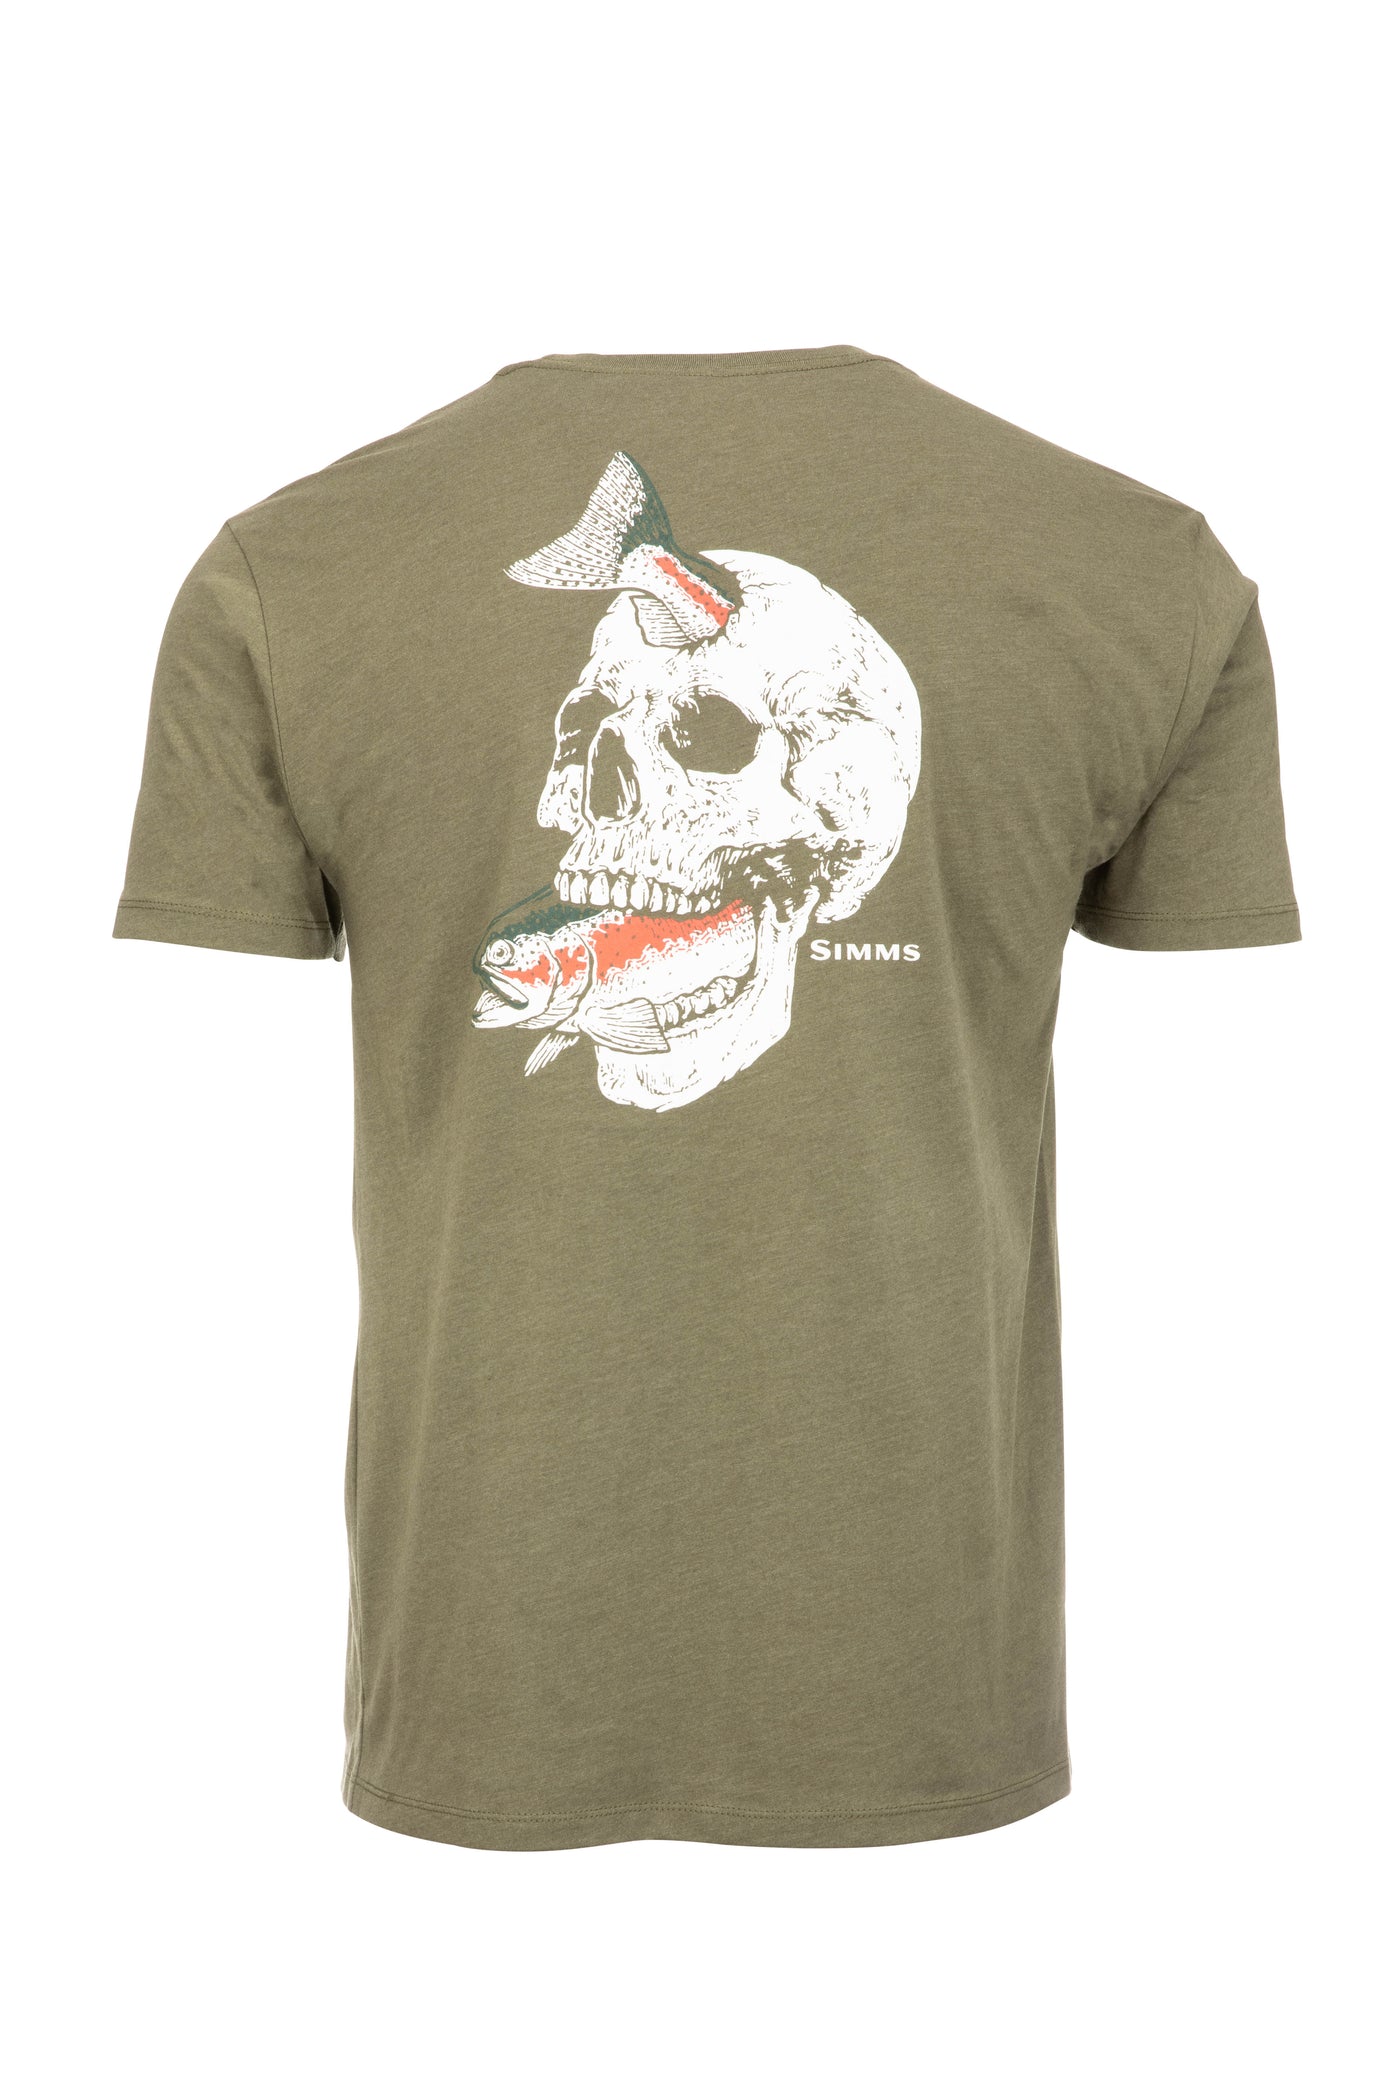 Simms Men's Trout On My Mind T-Shirt 2XL / Military Heather